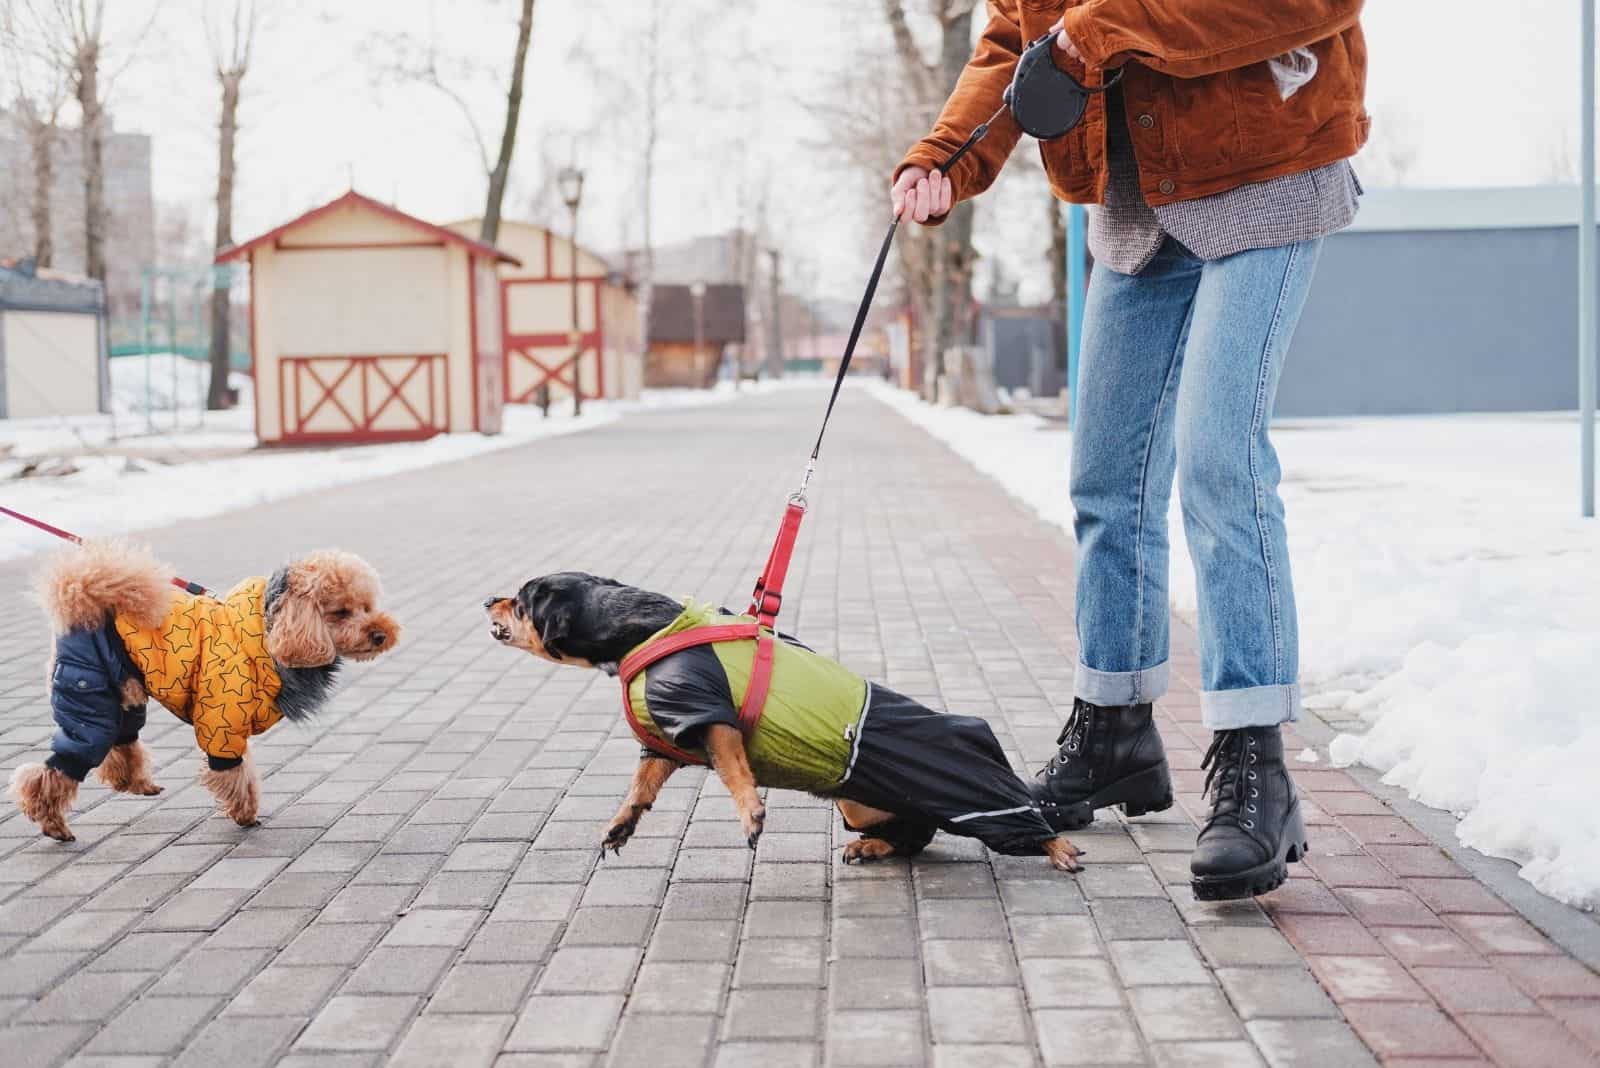 aggressive dachshund attacking another dog in the park held on leash by the owner